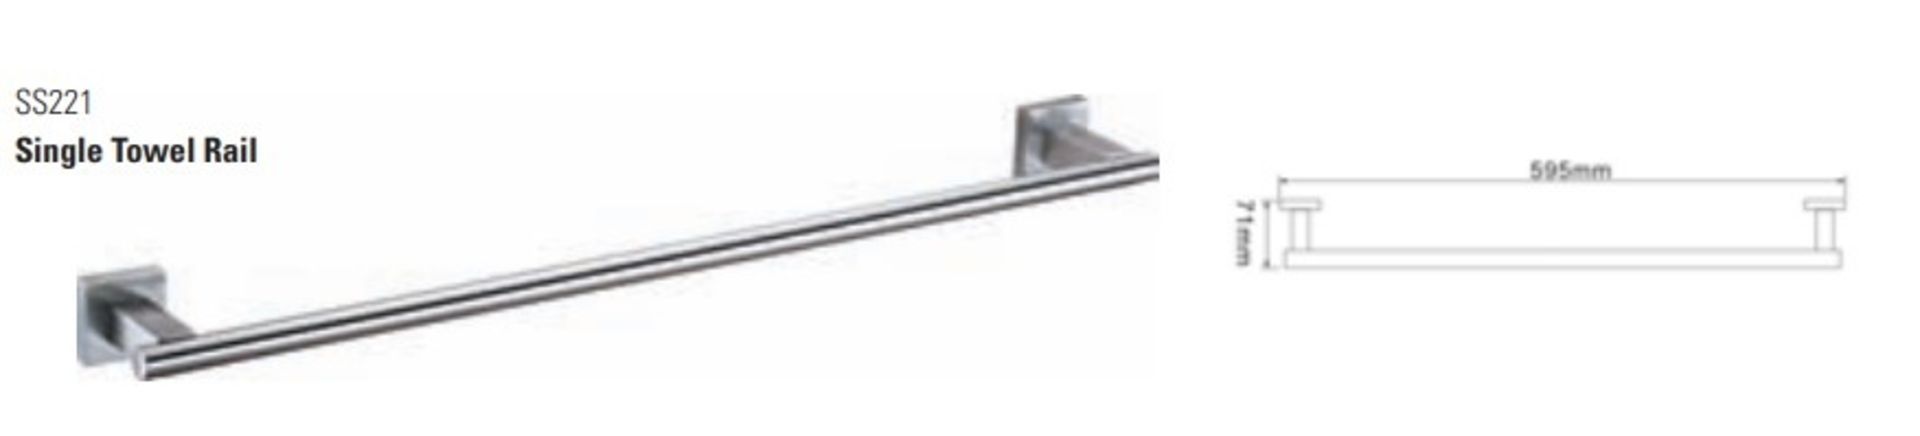 1 x Stonearth Single Towel Rack Rail - Solid Stainless Steel Bathroom Accessory - Brand New & - Image 2 of 2